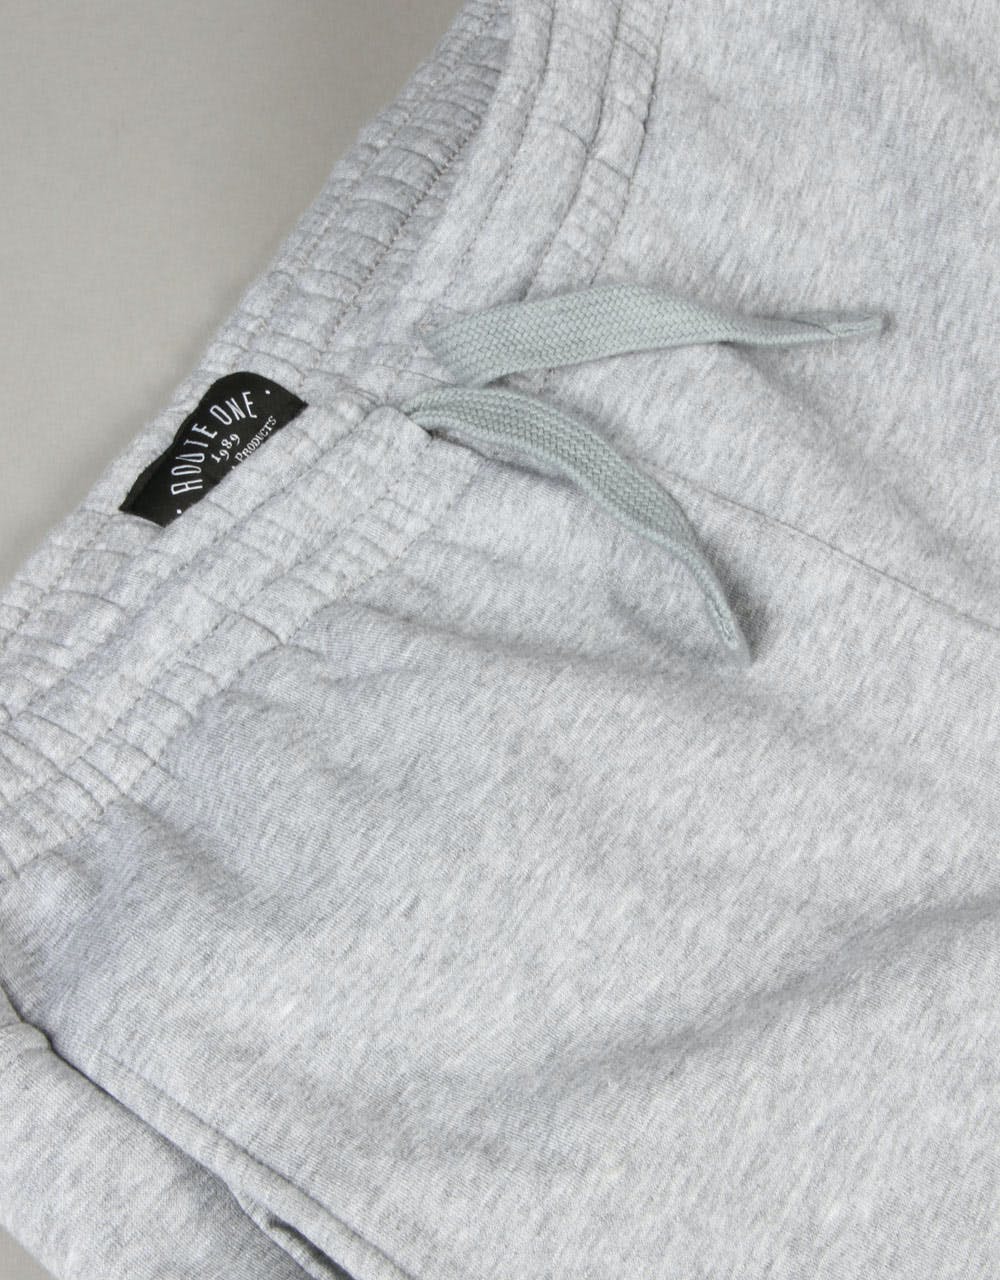 Route One Sweatpants - Light Grey Marl